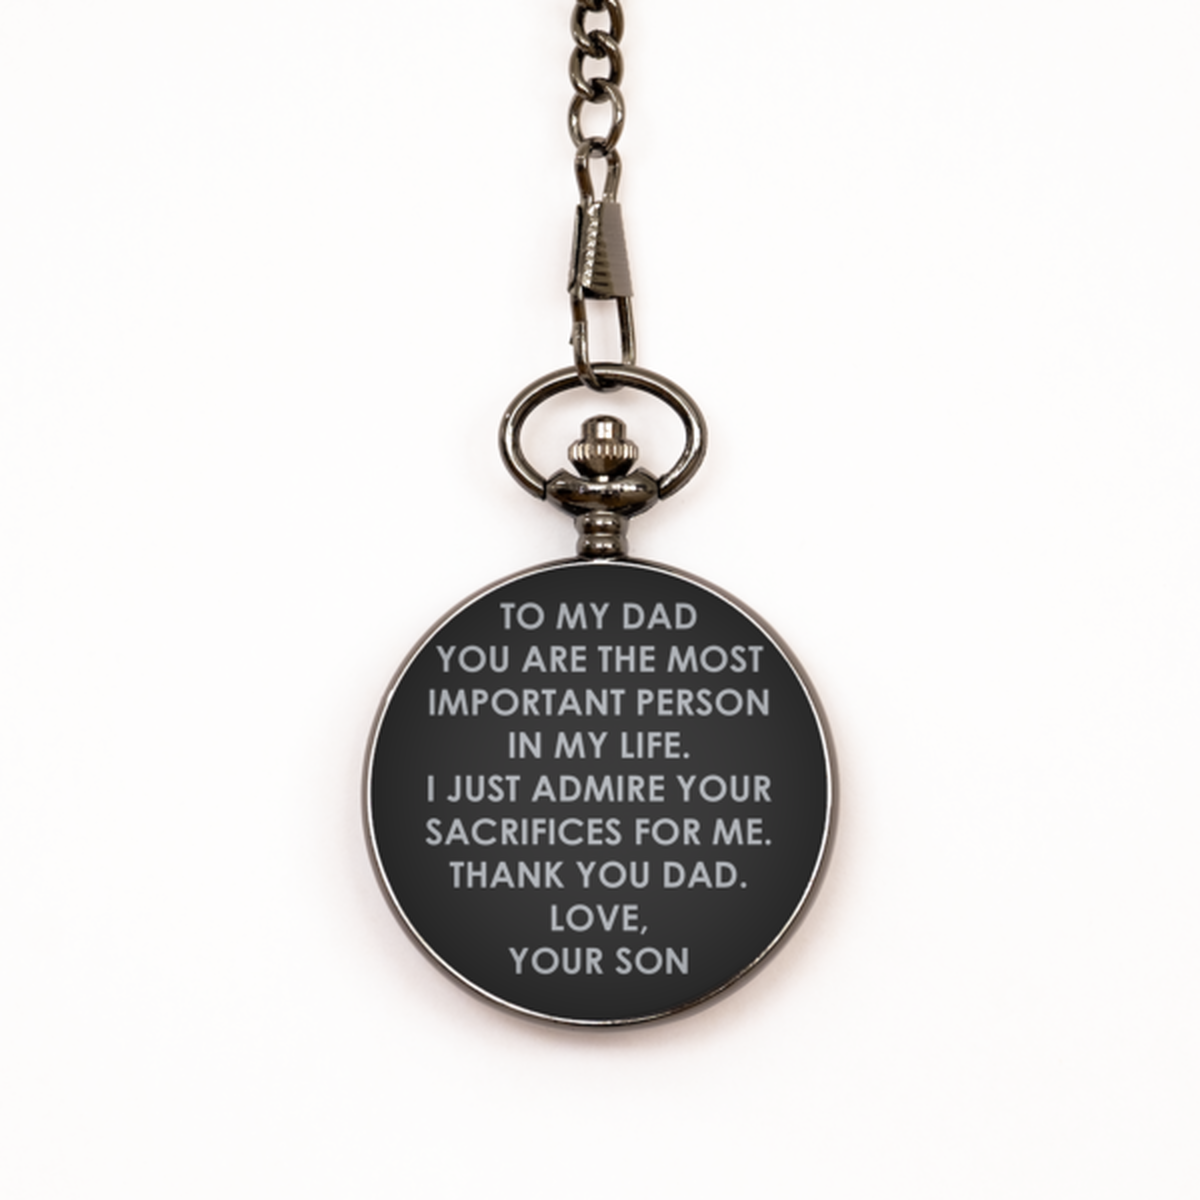 To My Dad Black Pocket Watch, You Are The Most Important Person, Fathers Day Gifts For Dad From Son, Birthday Gifts For Men